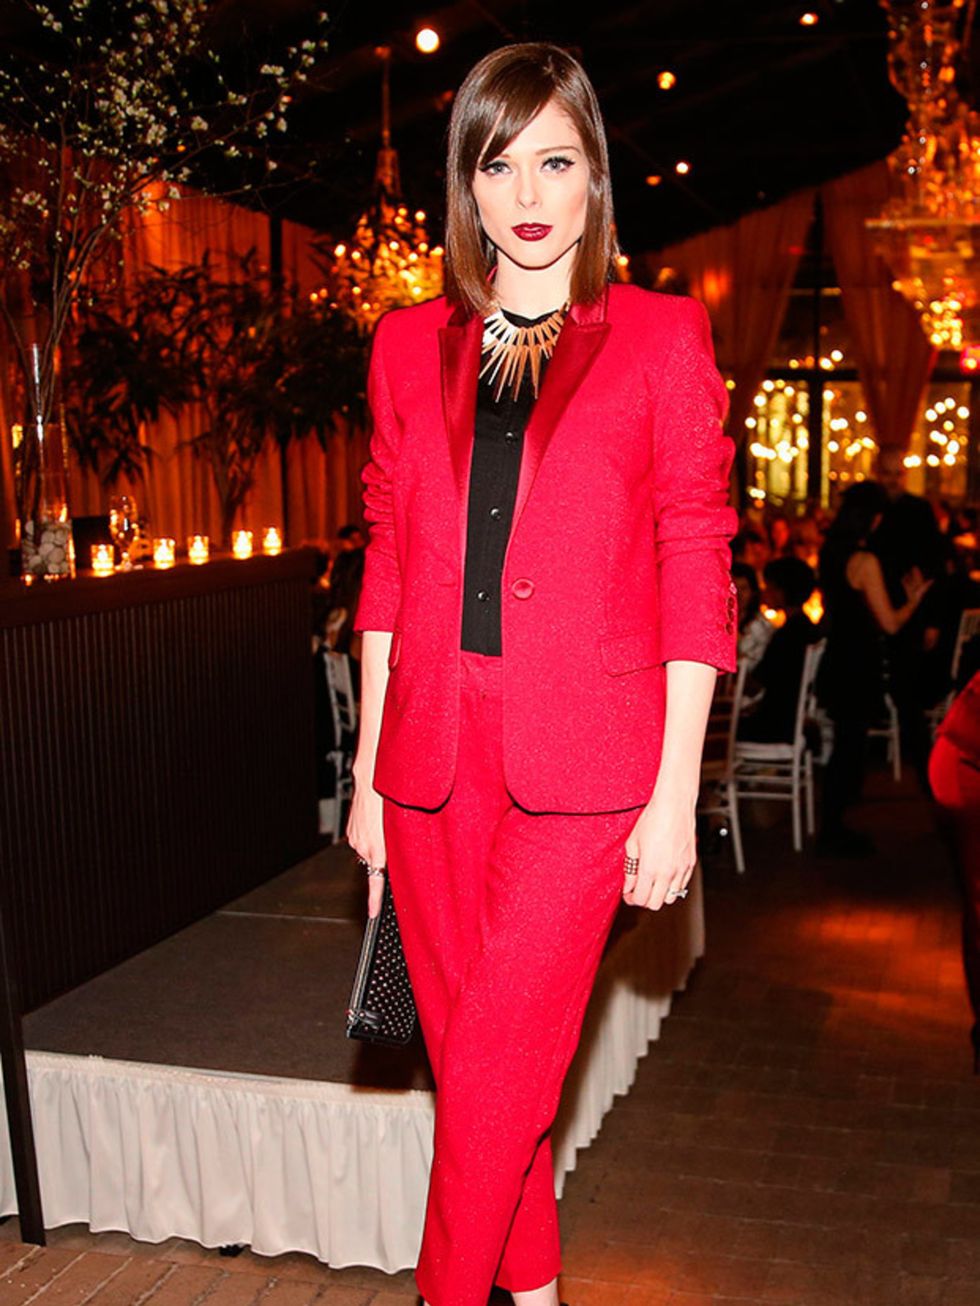 Coco Rocha at Escada Meets Thilo Westermann Collection in New York, February 2015.